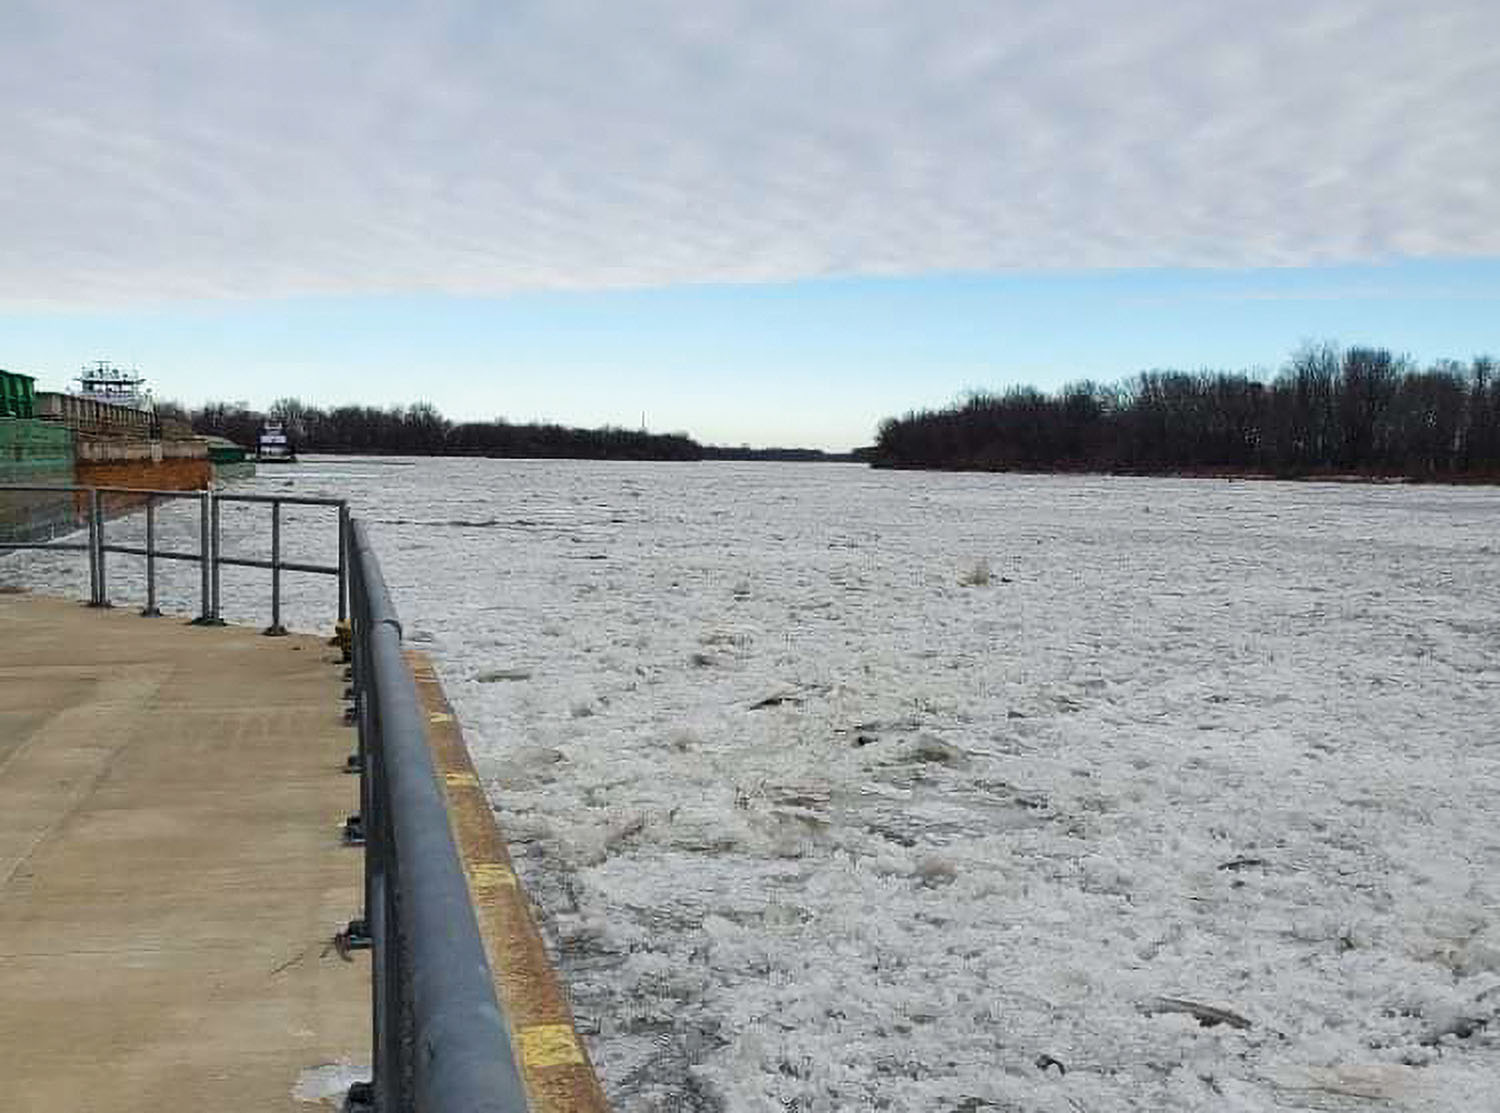 Ice extended bank to bank and several miles upstream of LaGrange Lock and Dam on January 9. (Photo courtesy of Rock Island Engineer District)